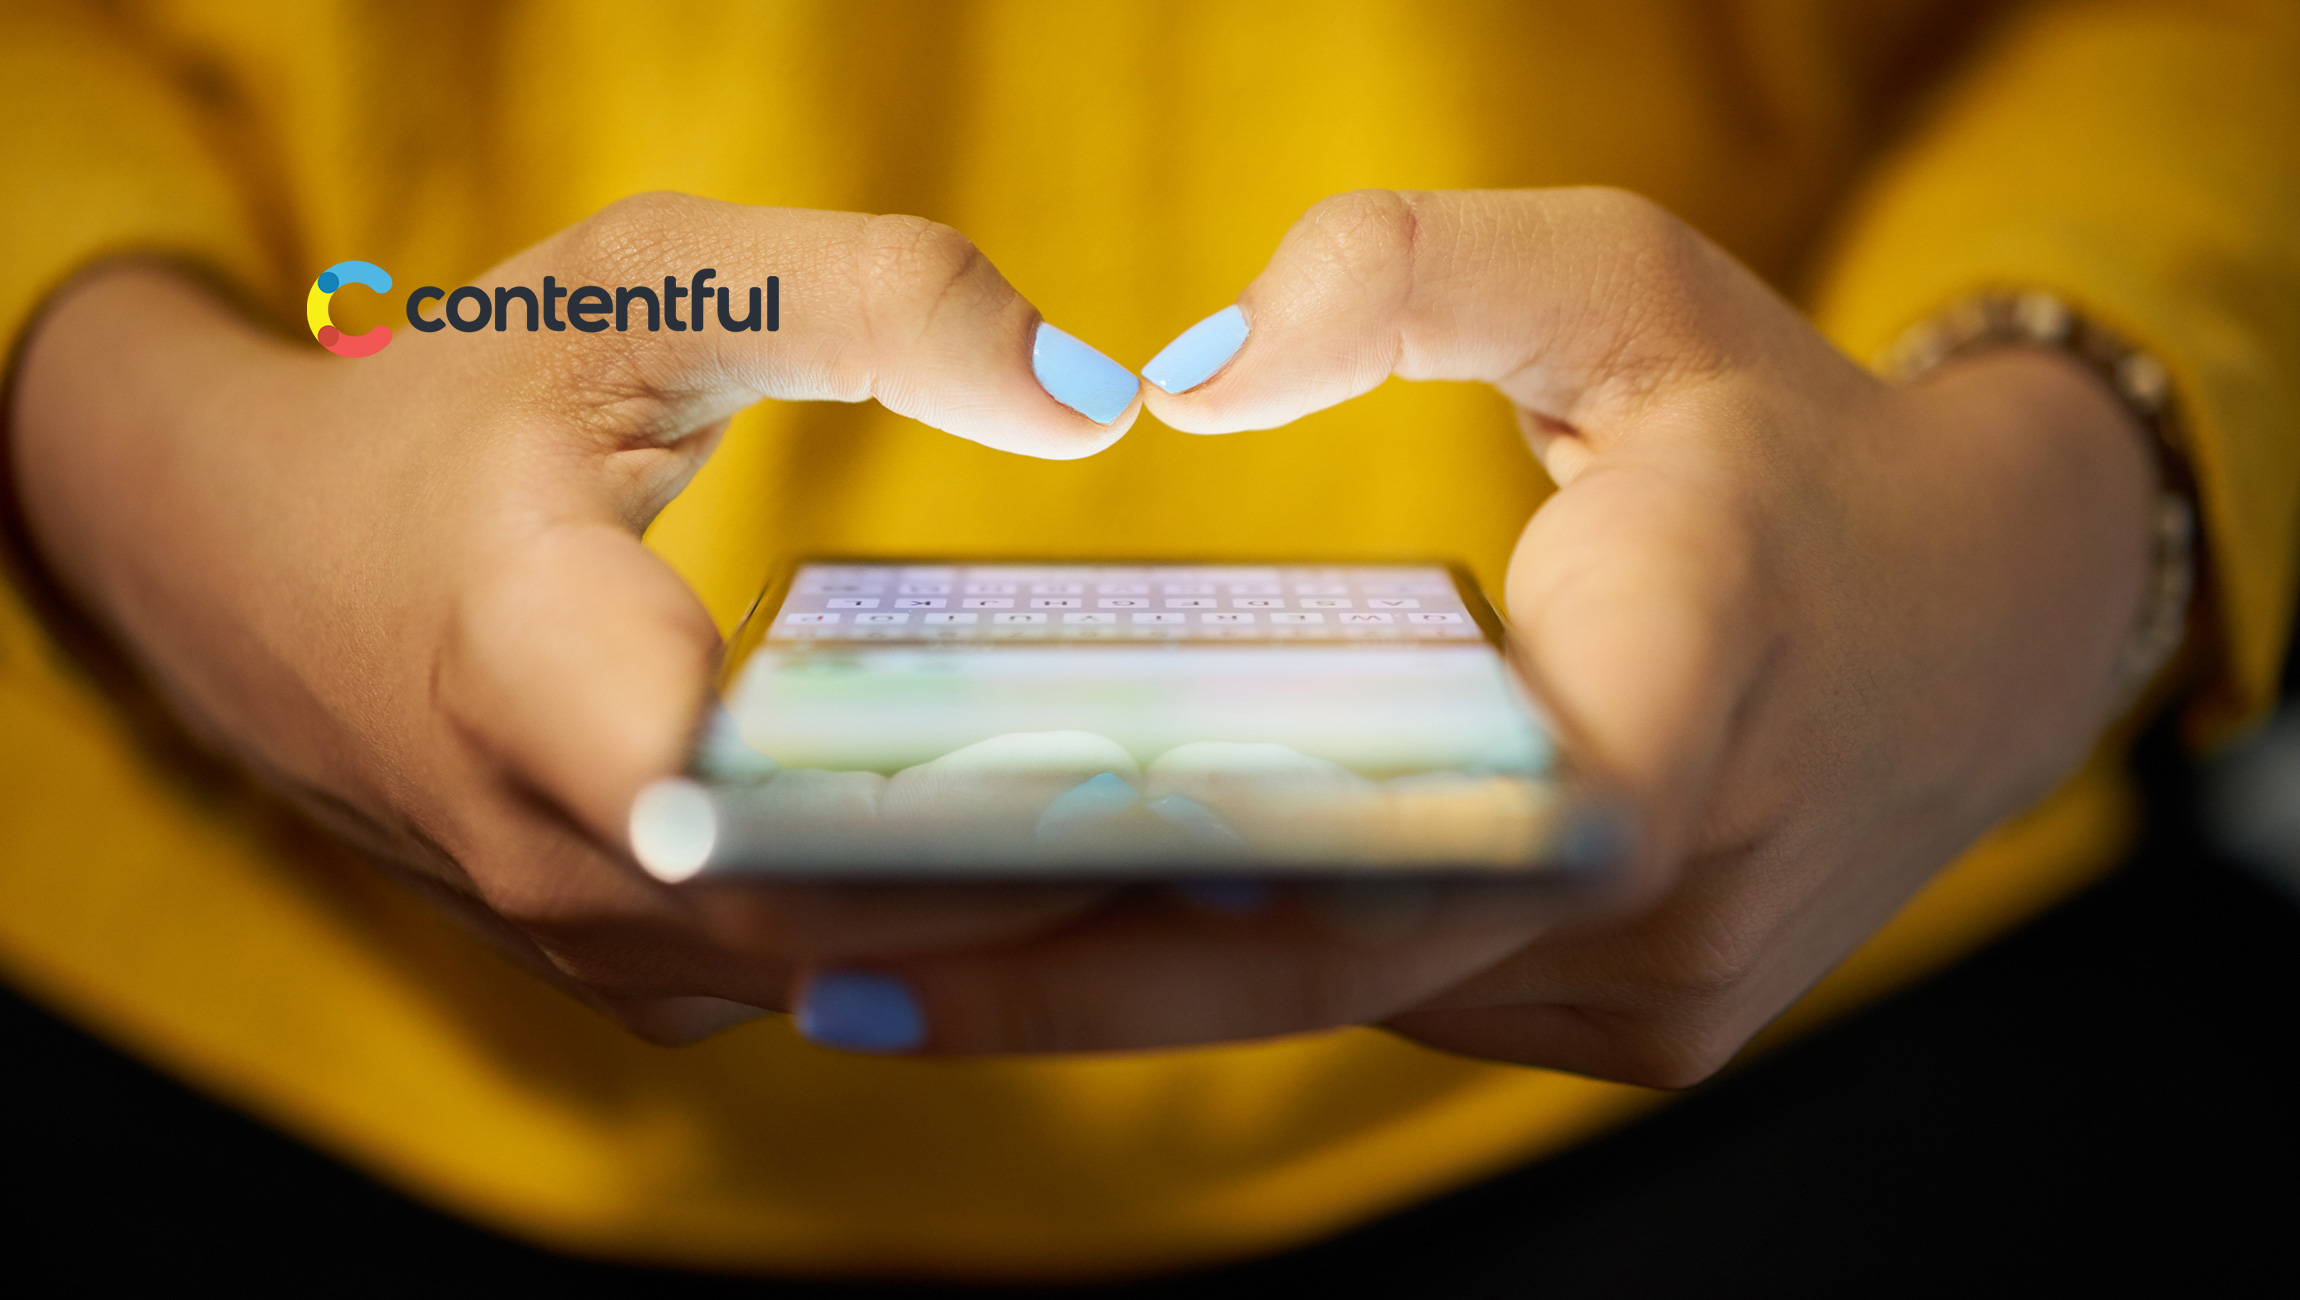 Contentful Announces New Partnerships in Germany to Help Brands Become Digital-First and Accelerate Innovation